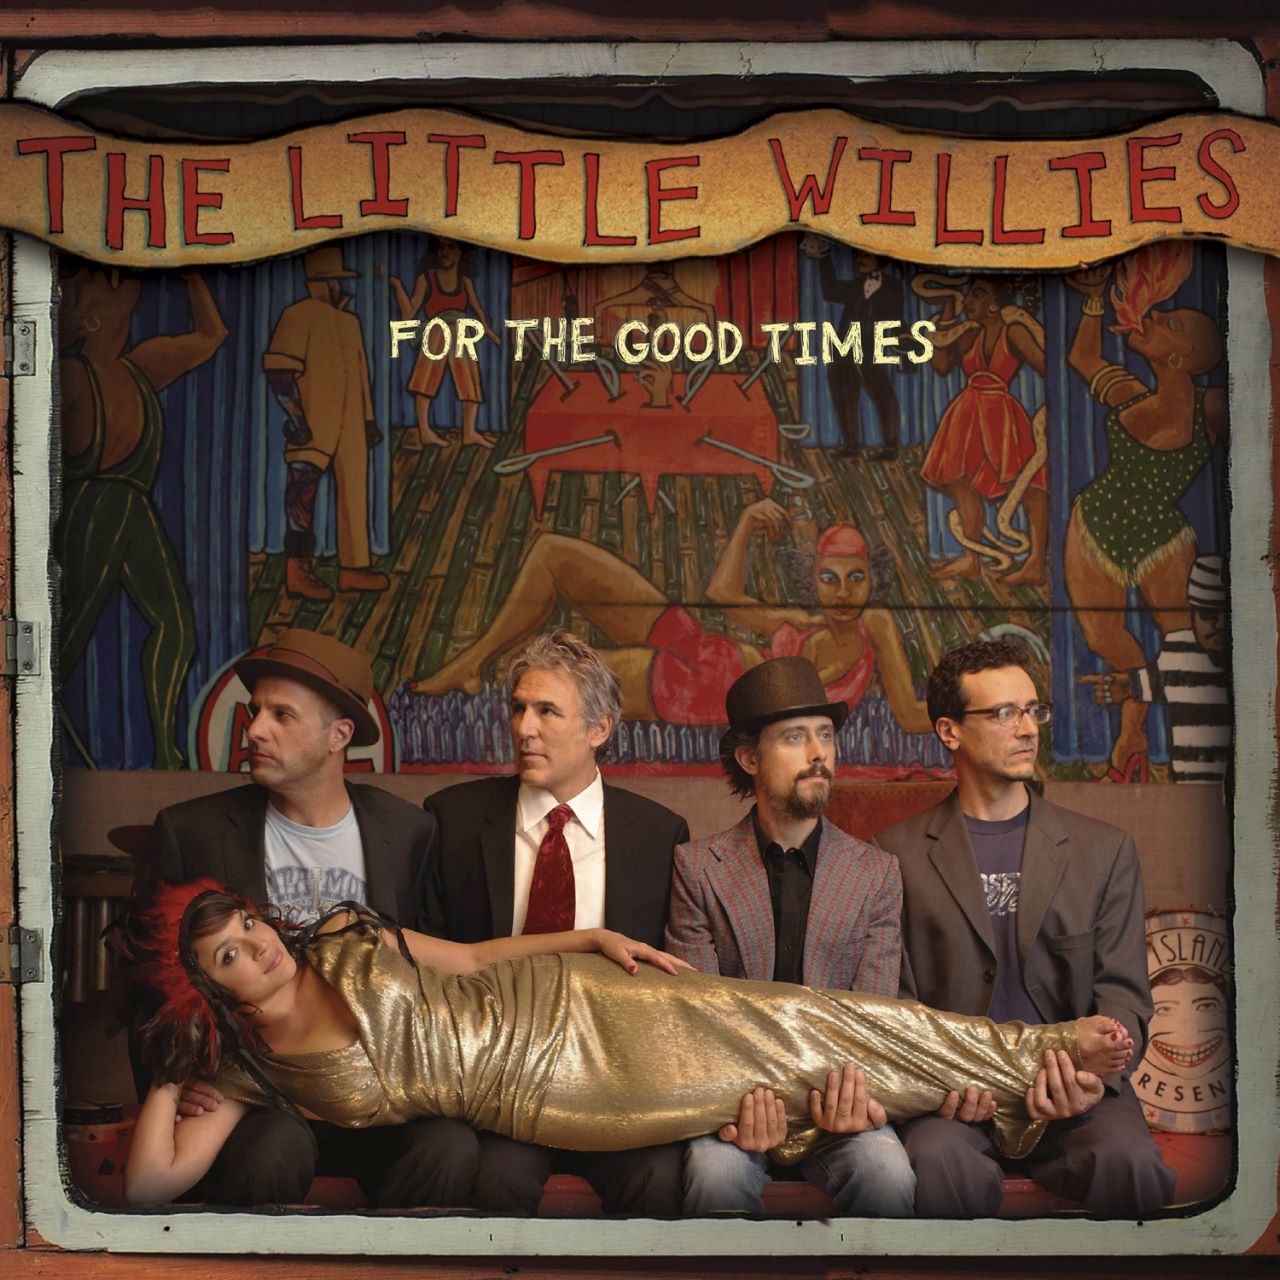 Little Willies – For The Good Times cover album